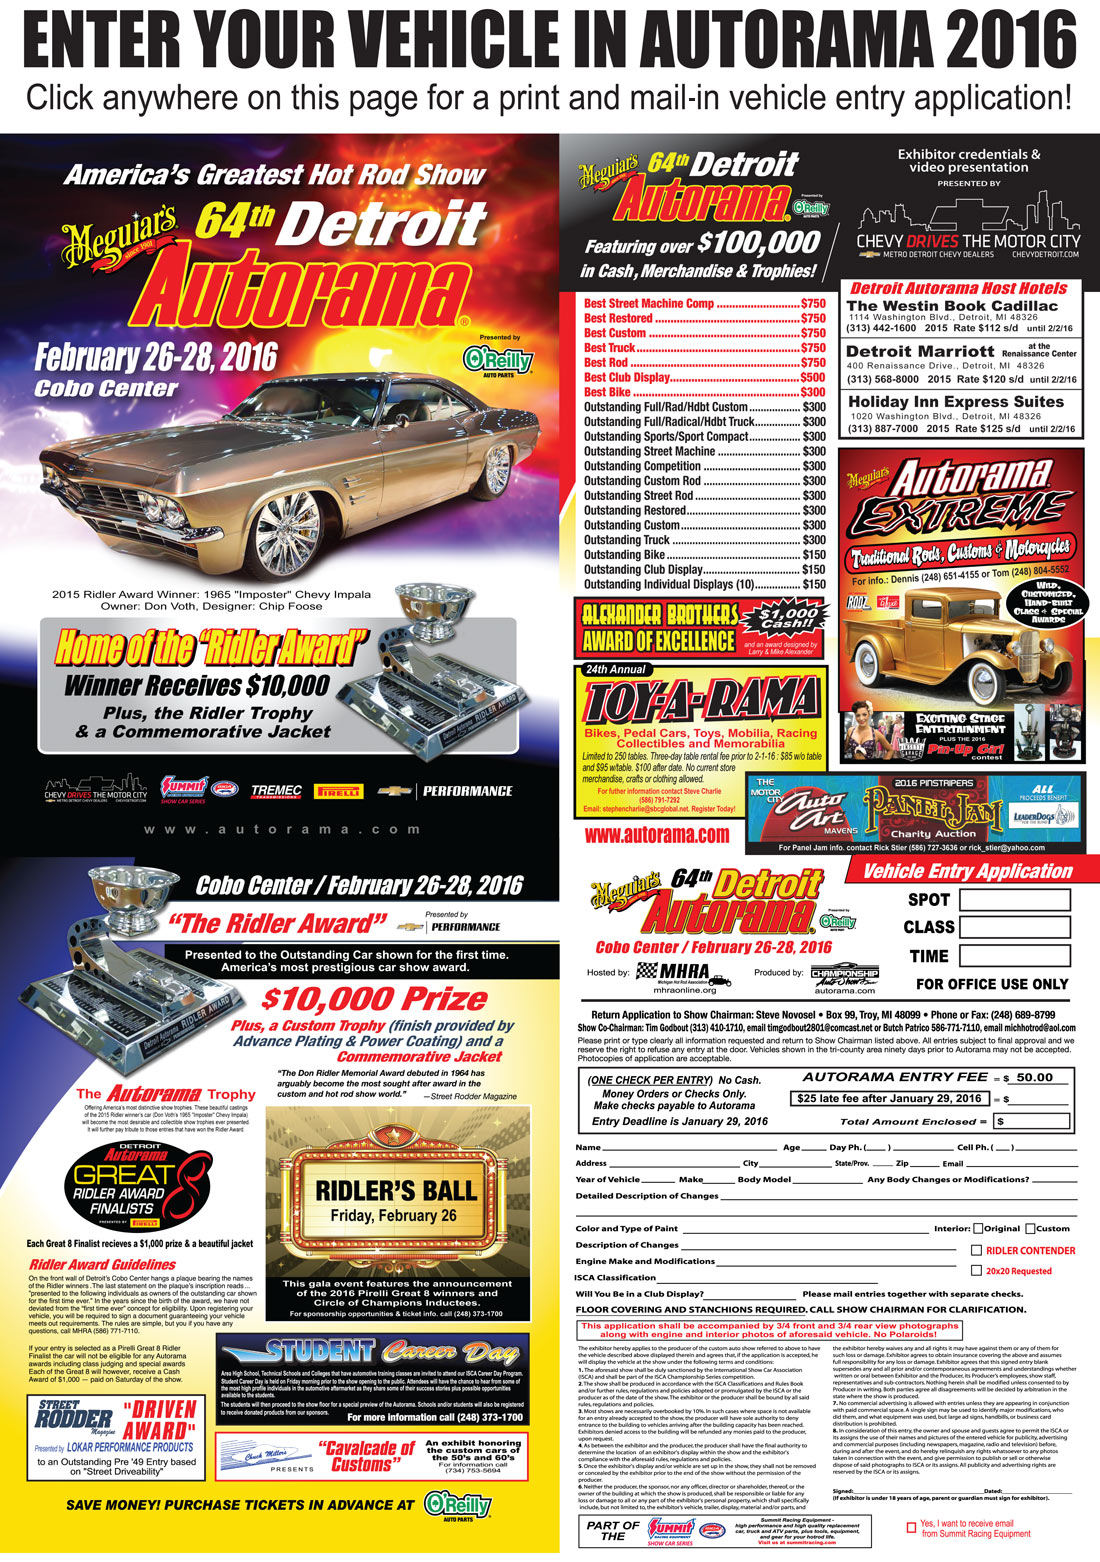 Enter Your Vehicle in the 2016 Autorama